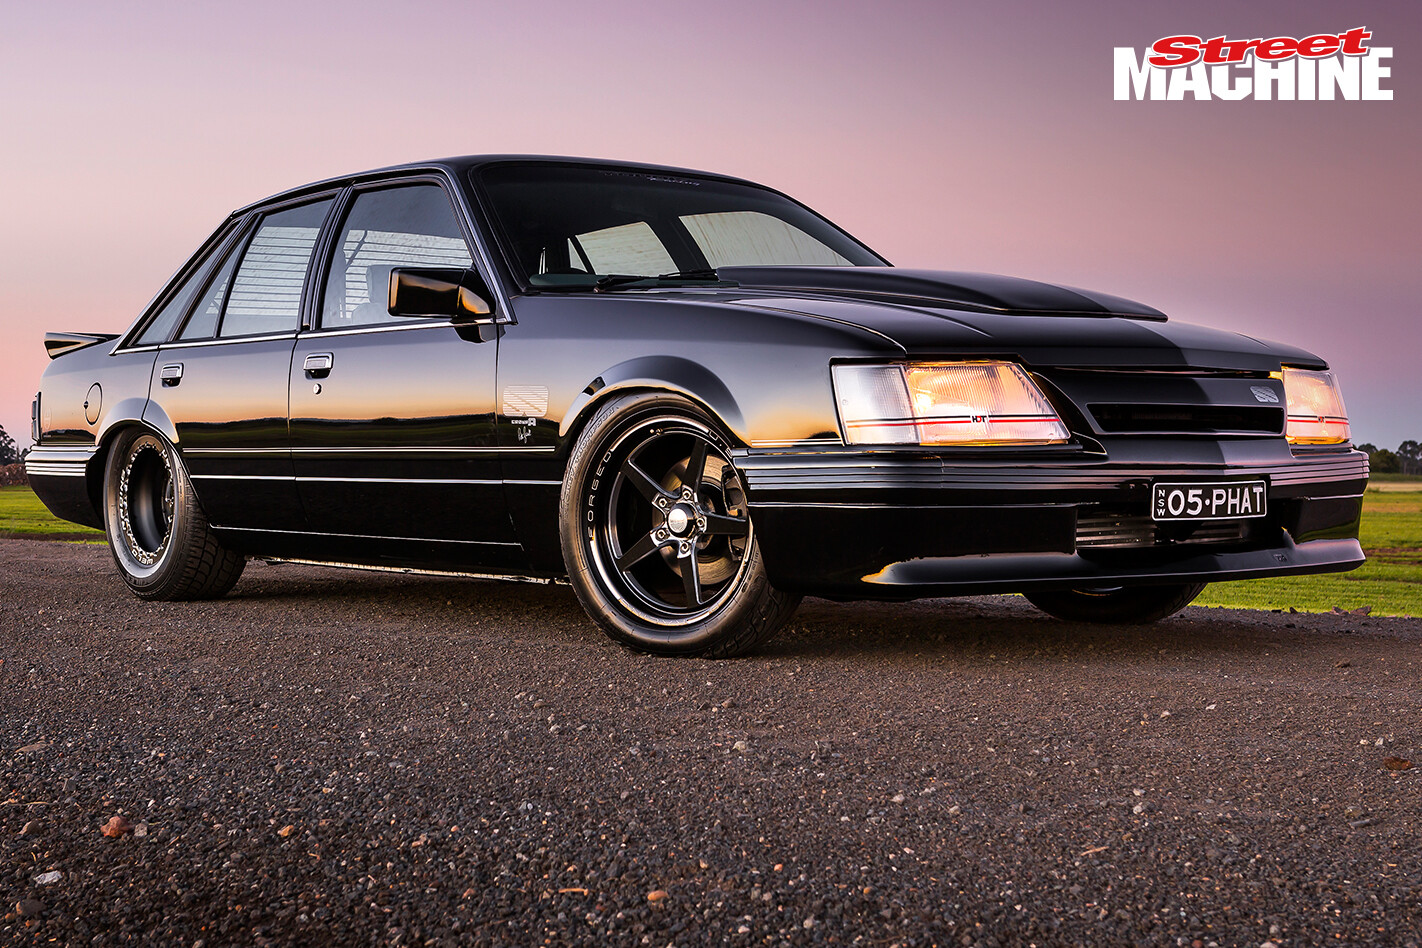 Turbo LS-powered VK Commodore Brocky pic